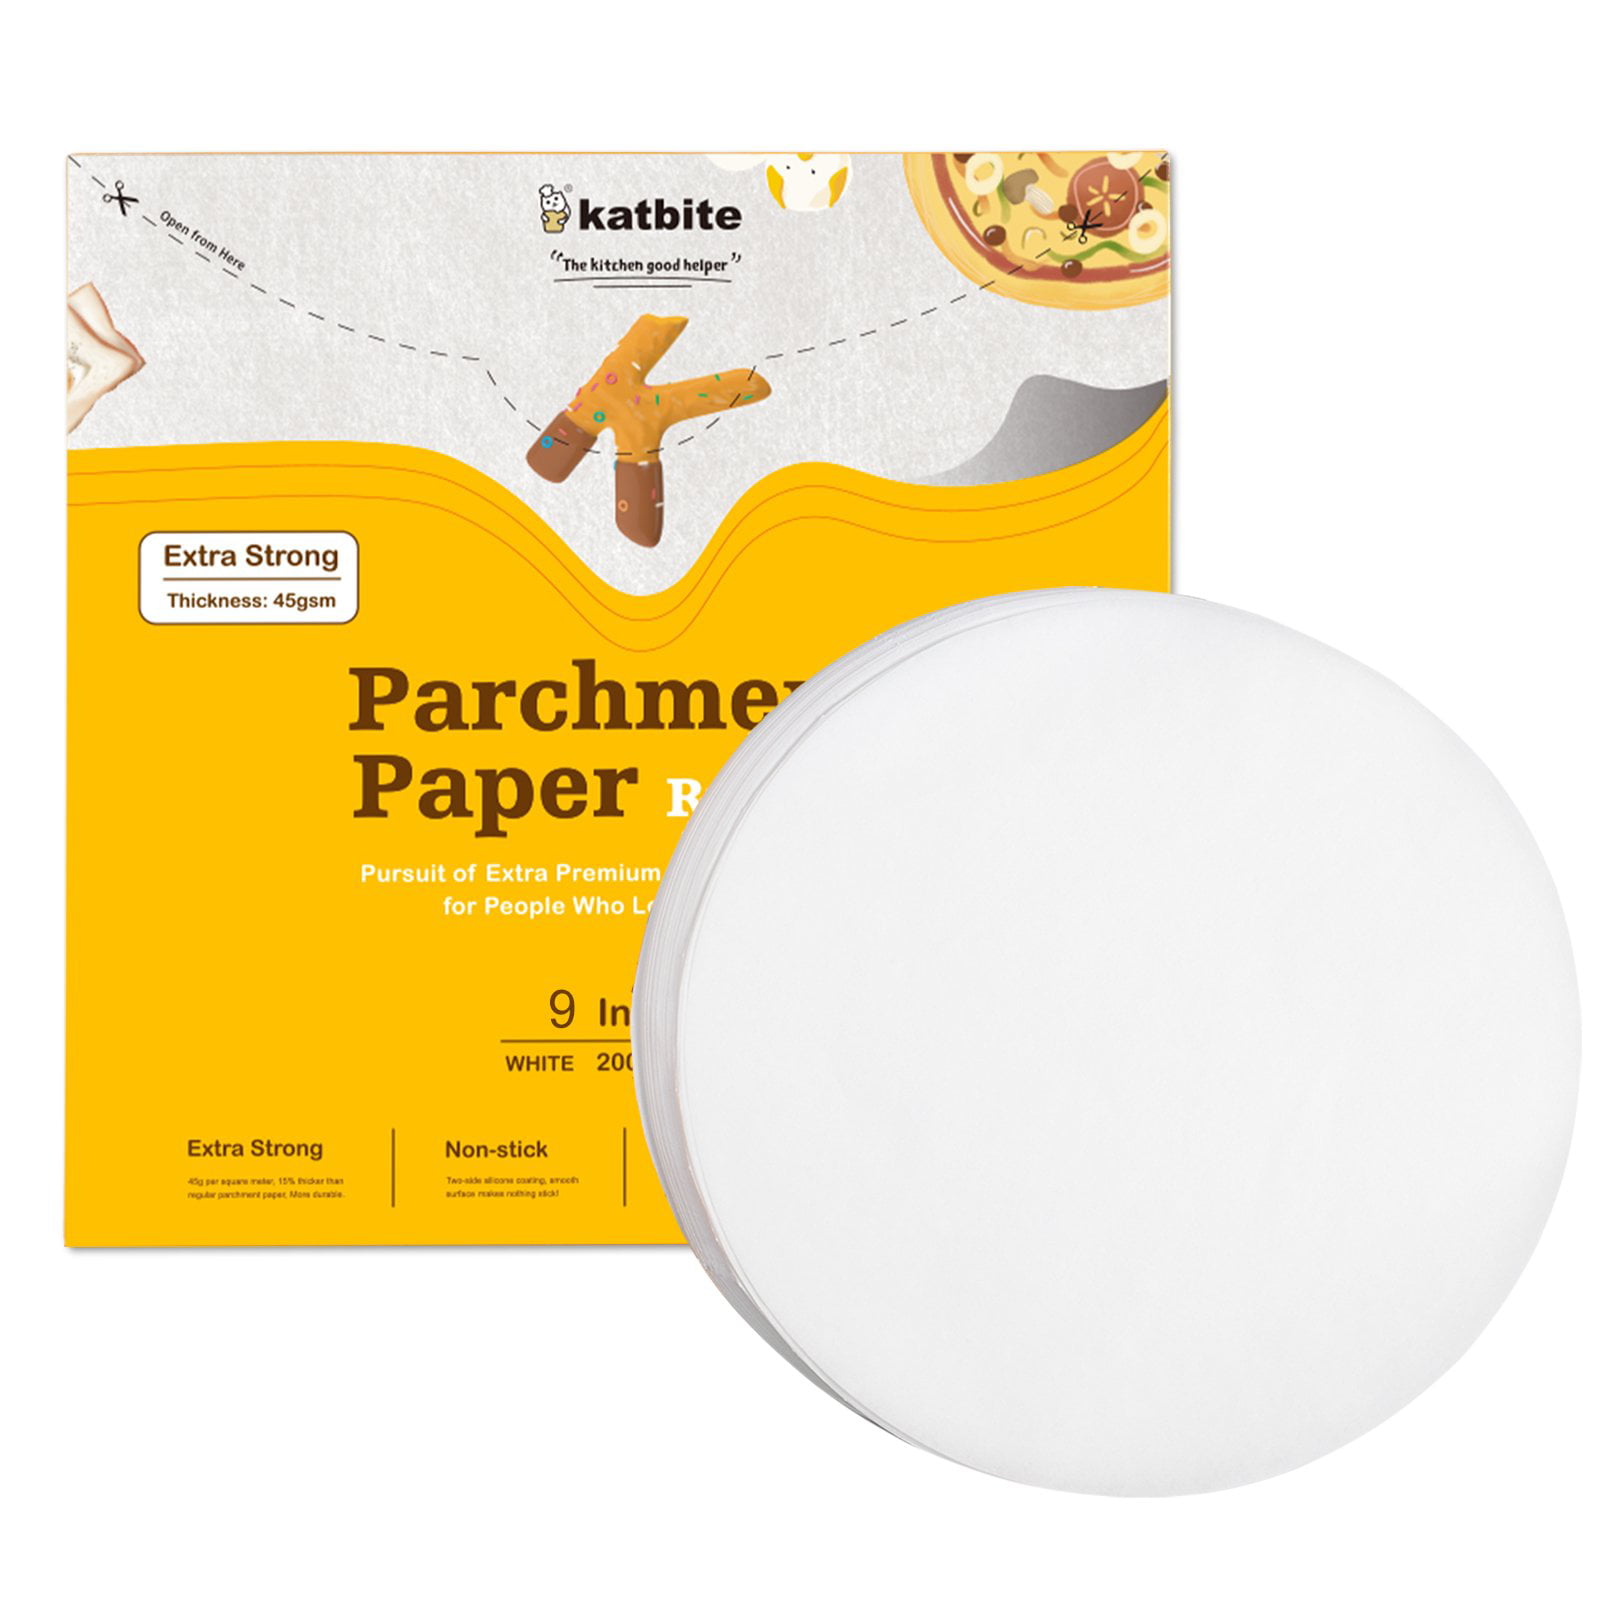 Bkpearl 150 Pcs Round Parchments Toaster Oven Microwave XINRUI Cooking 7 Inch Baking Paper Circles Round Parchment Sheets Paper Liners for Baking Cakes Cake Tin